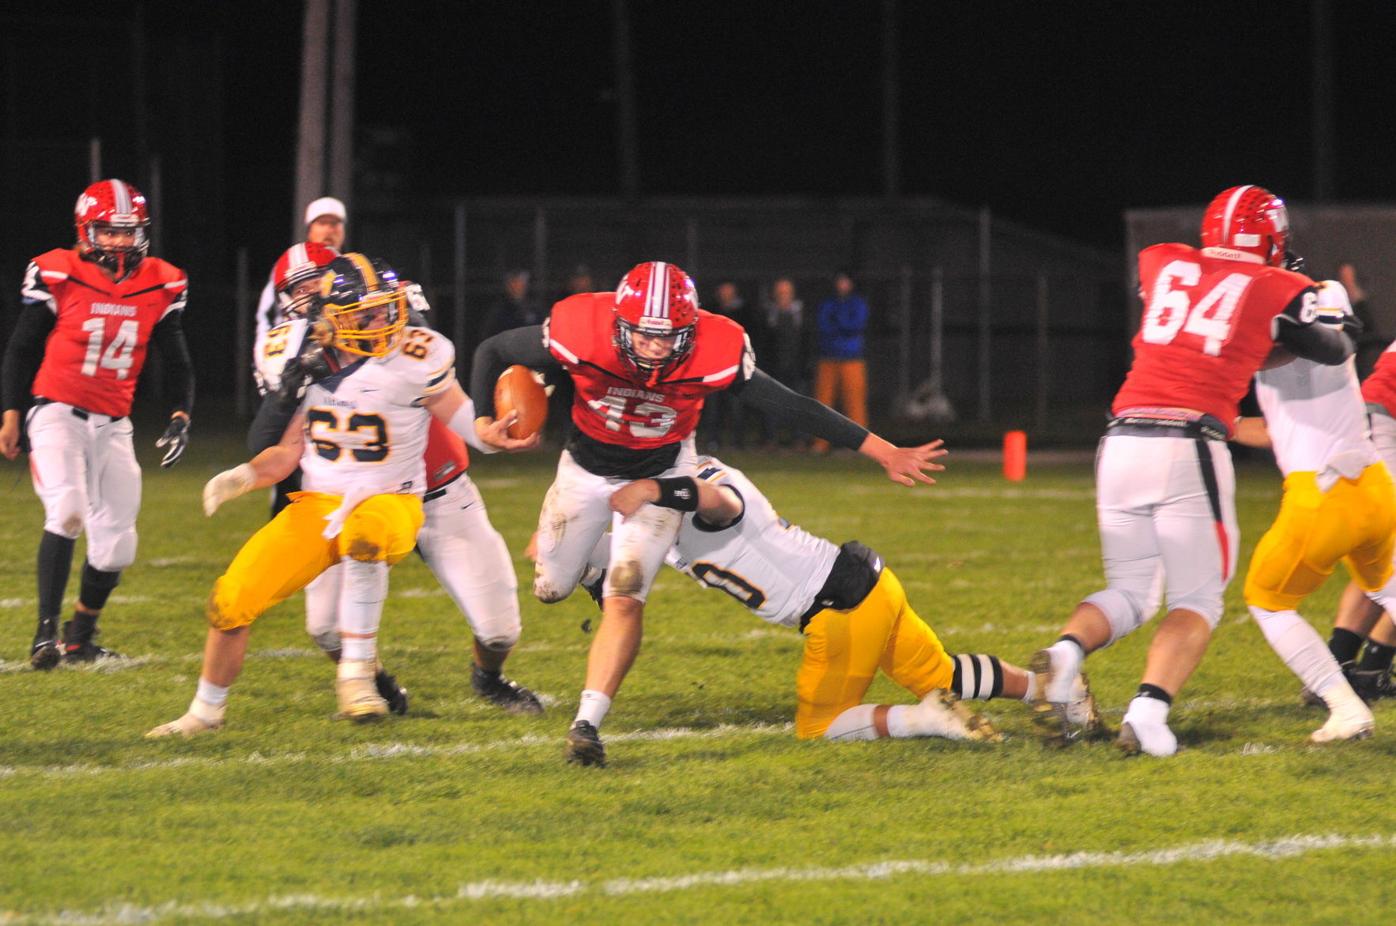 2020 Football Preview: Enthusiasm high for Wauseon this fall | Local